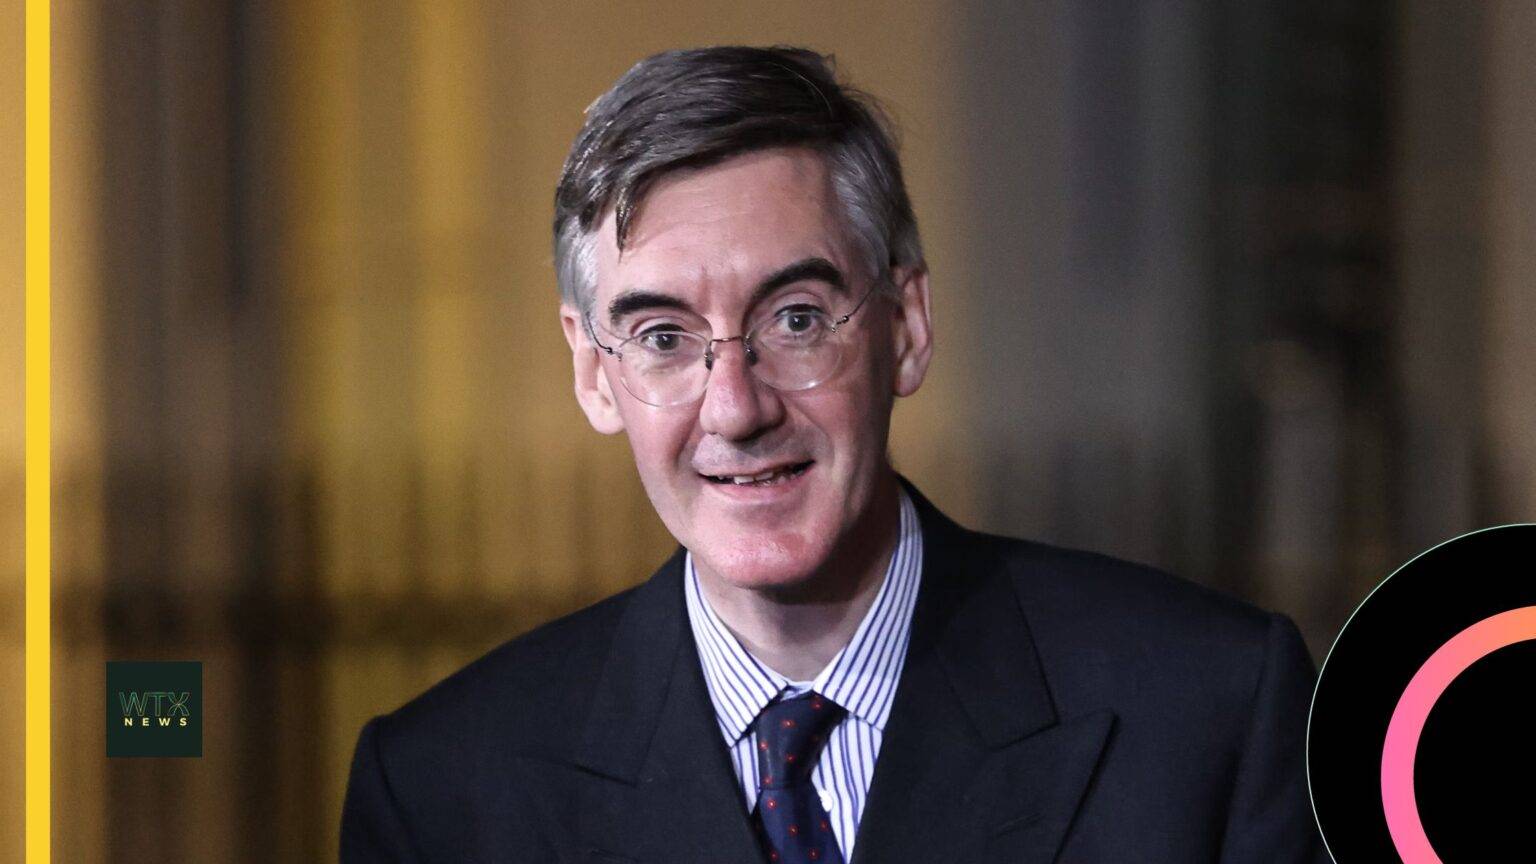 Yes … we’re really paying Jacob Rees-Mogg £17k compensation